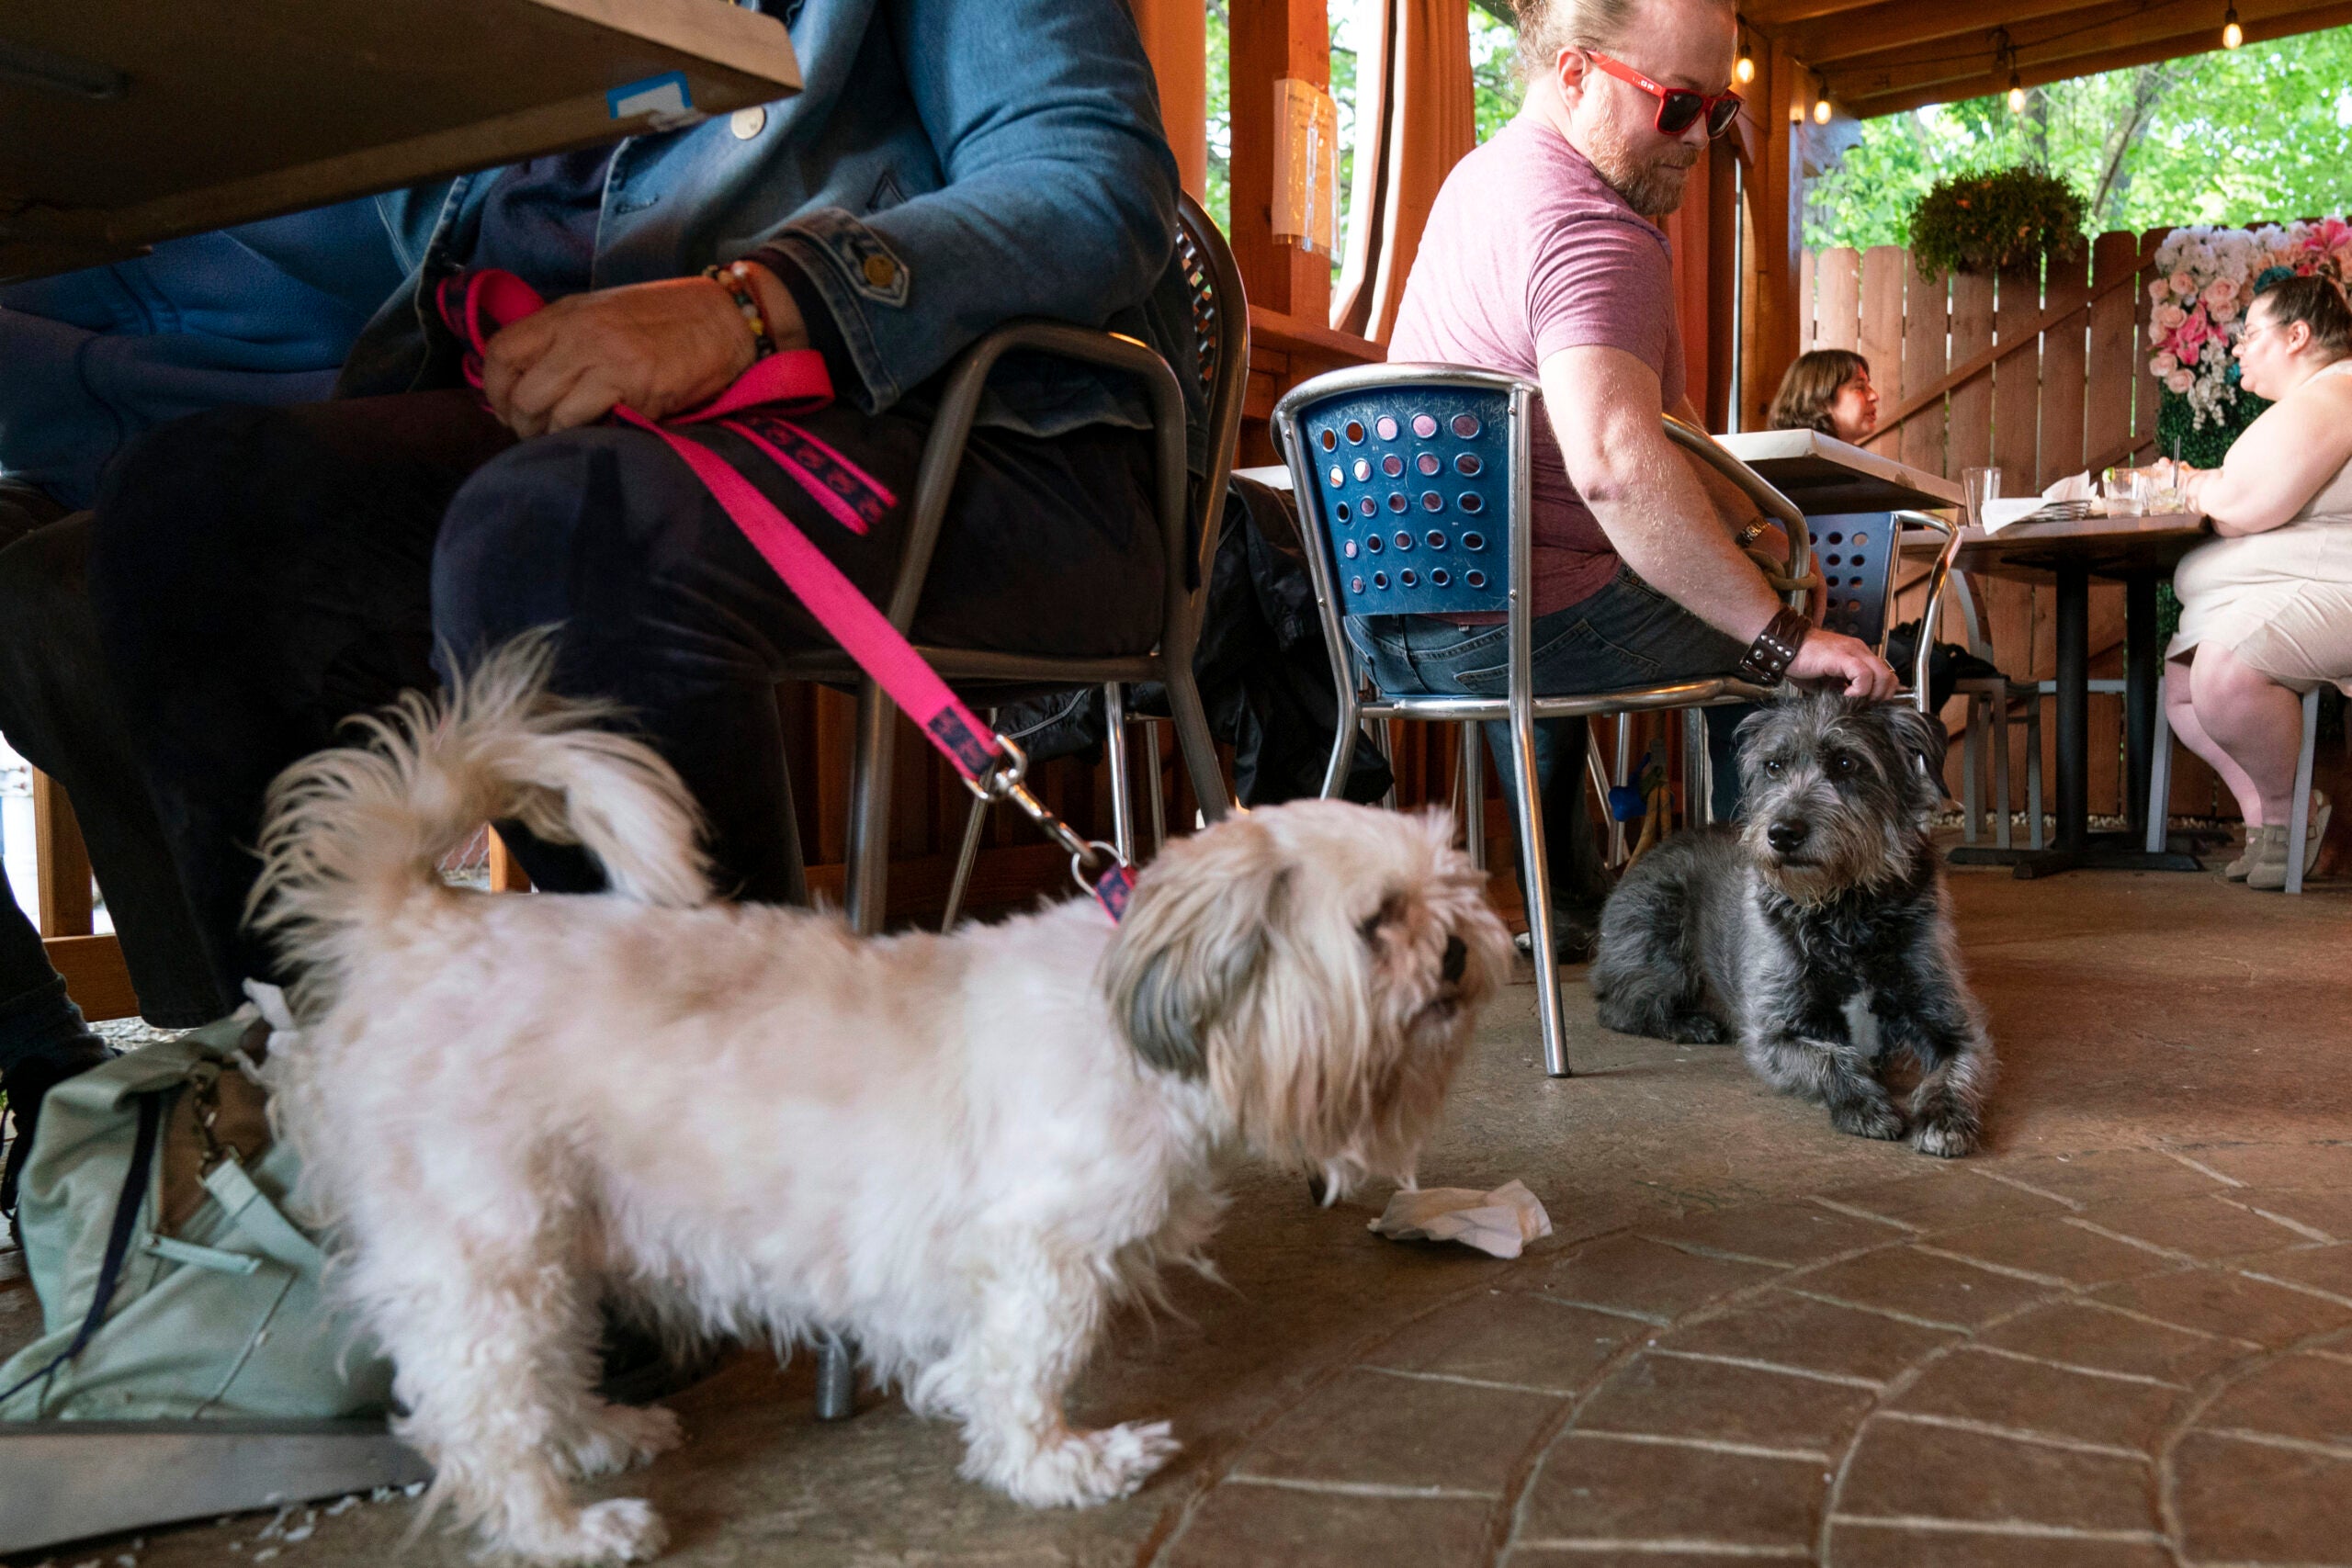 Monty Hobbs, right, and his dog Mattox sit next to another pet dog on the patio at the Olive Lounge in Takoma Park, Md.